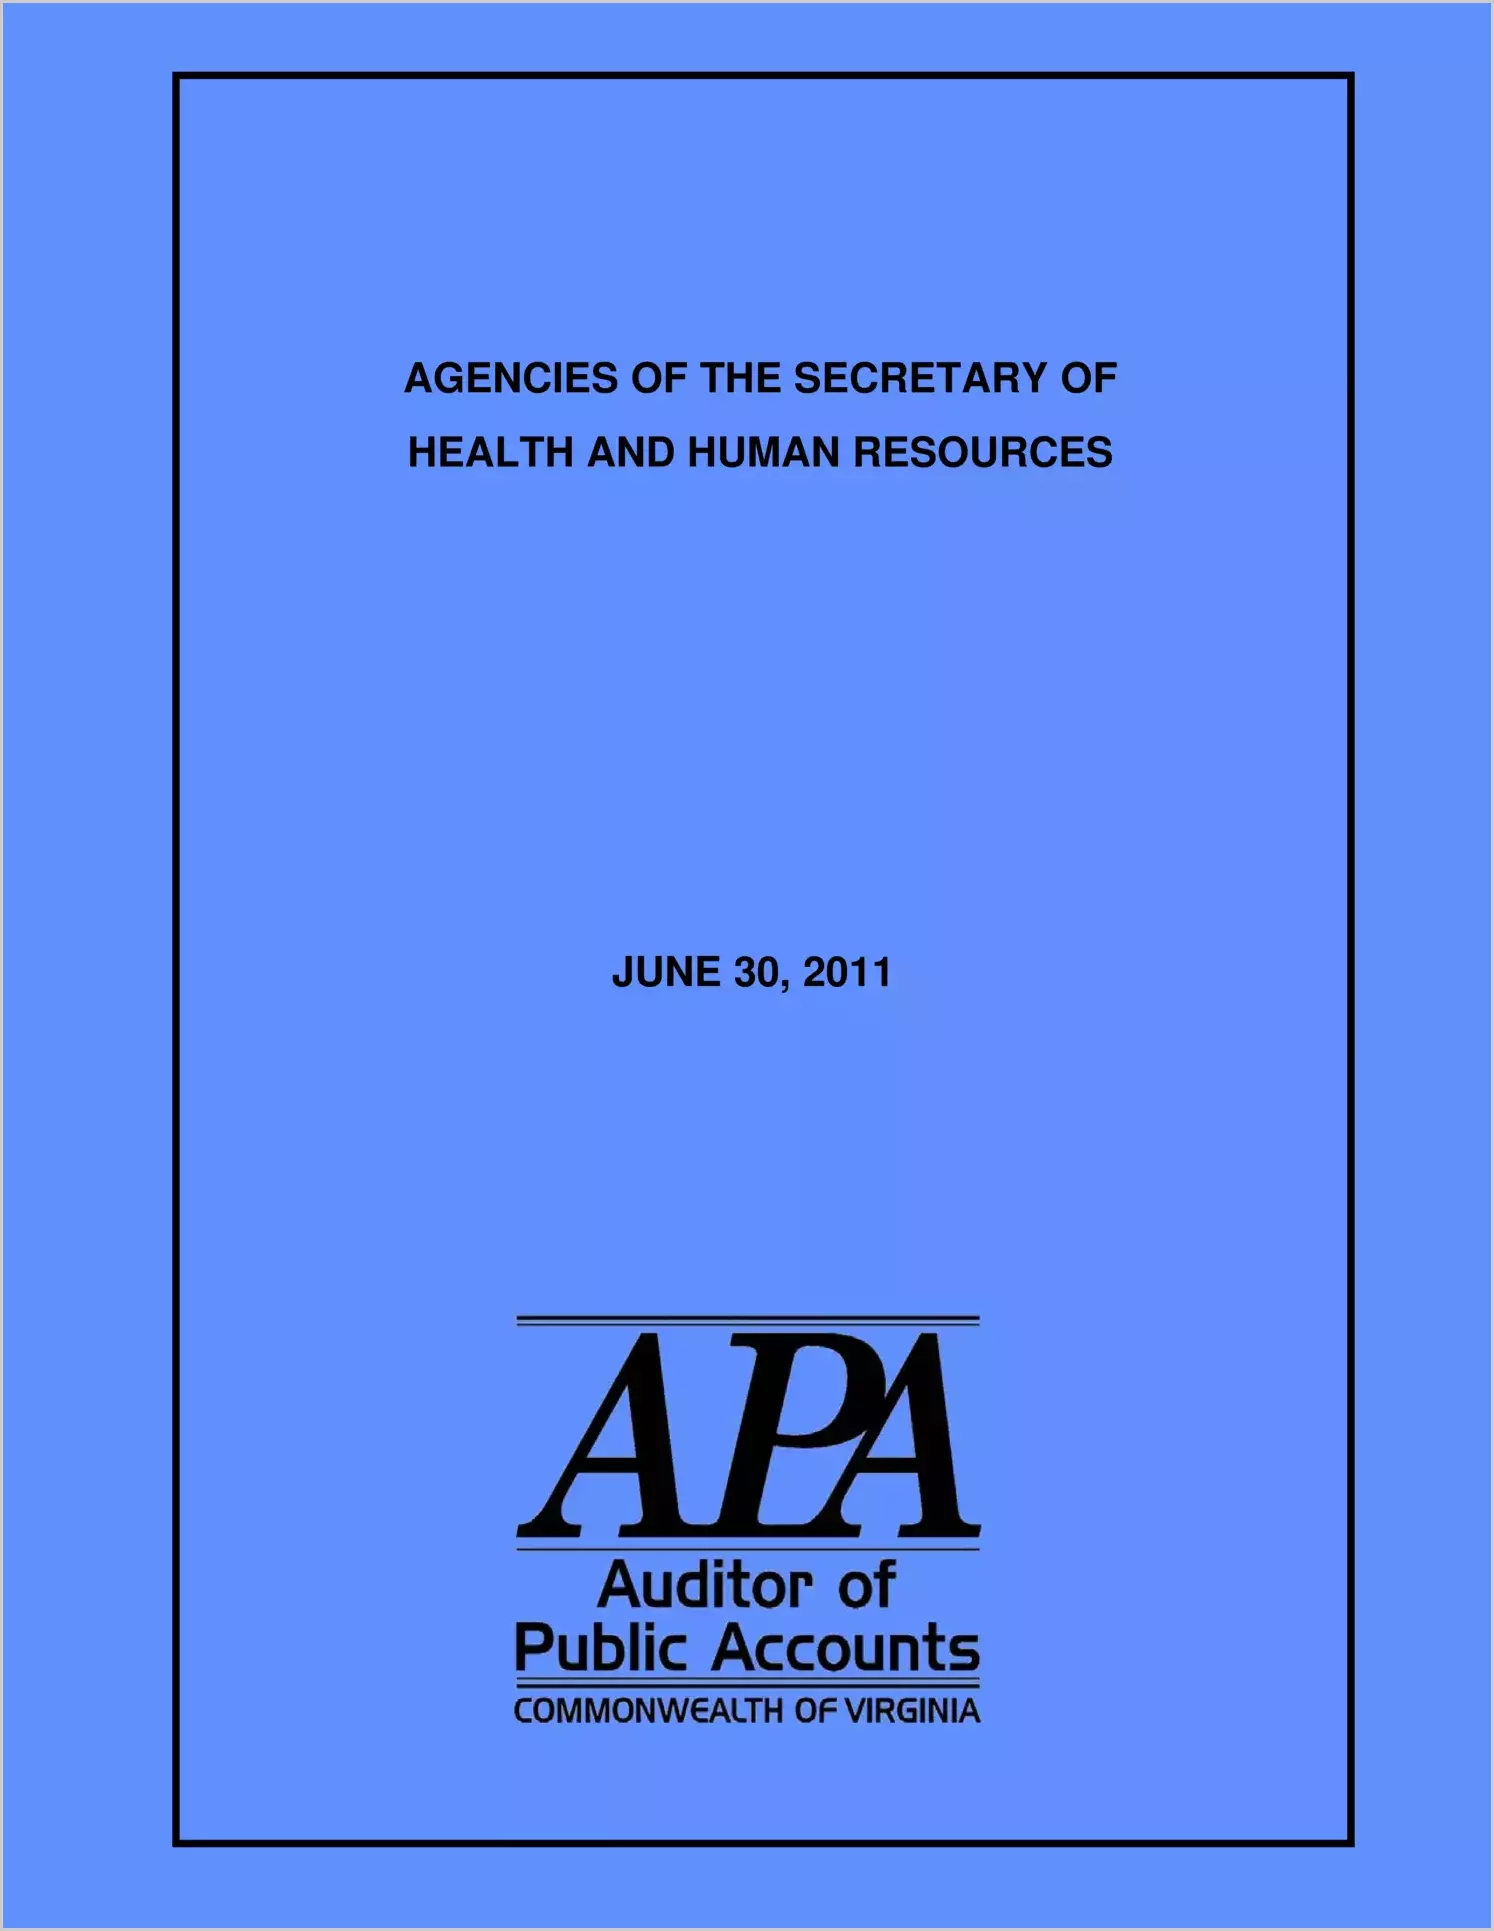 Agencies of the Secretary of Health and Human Resources - June 30, 2011